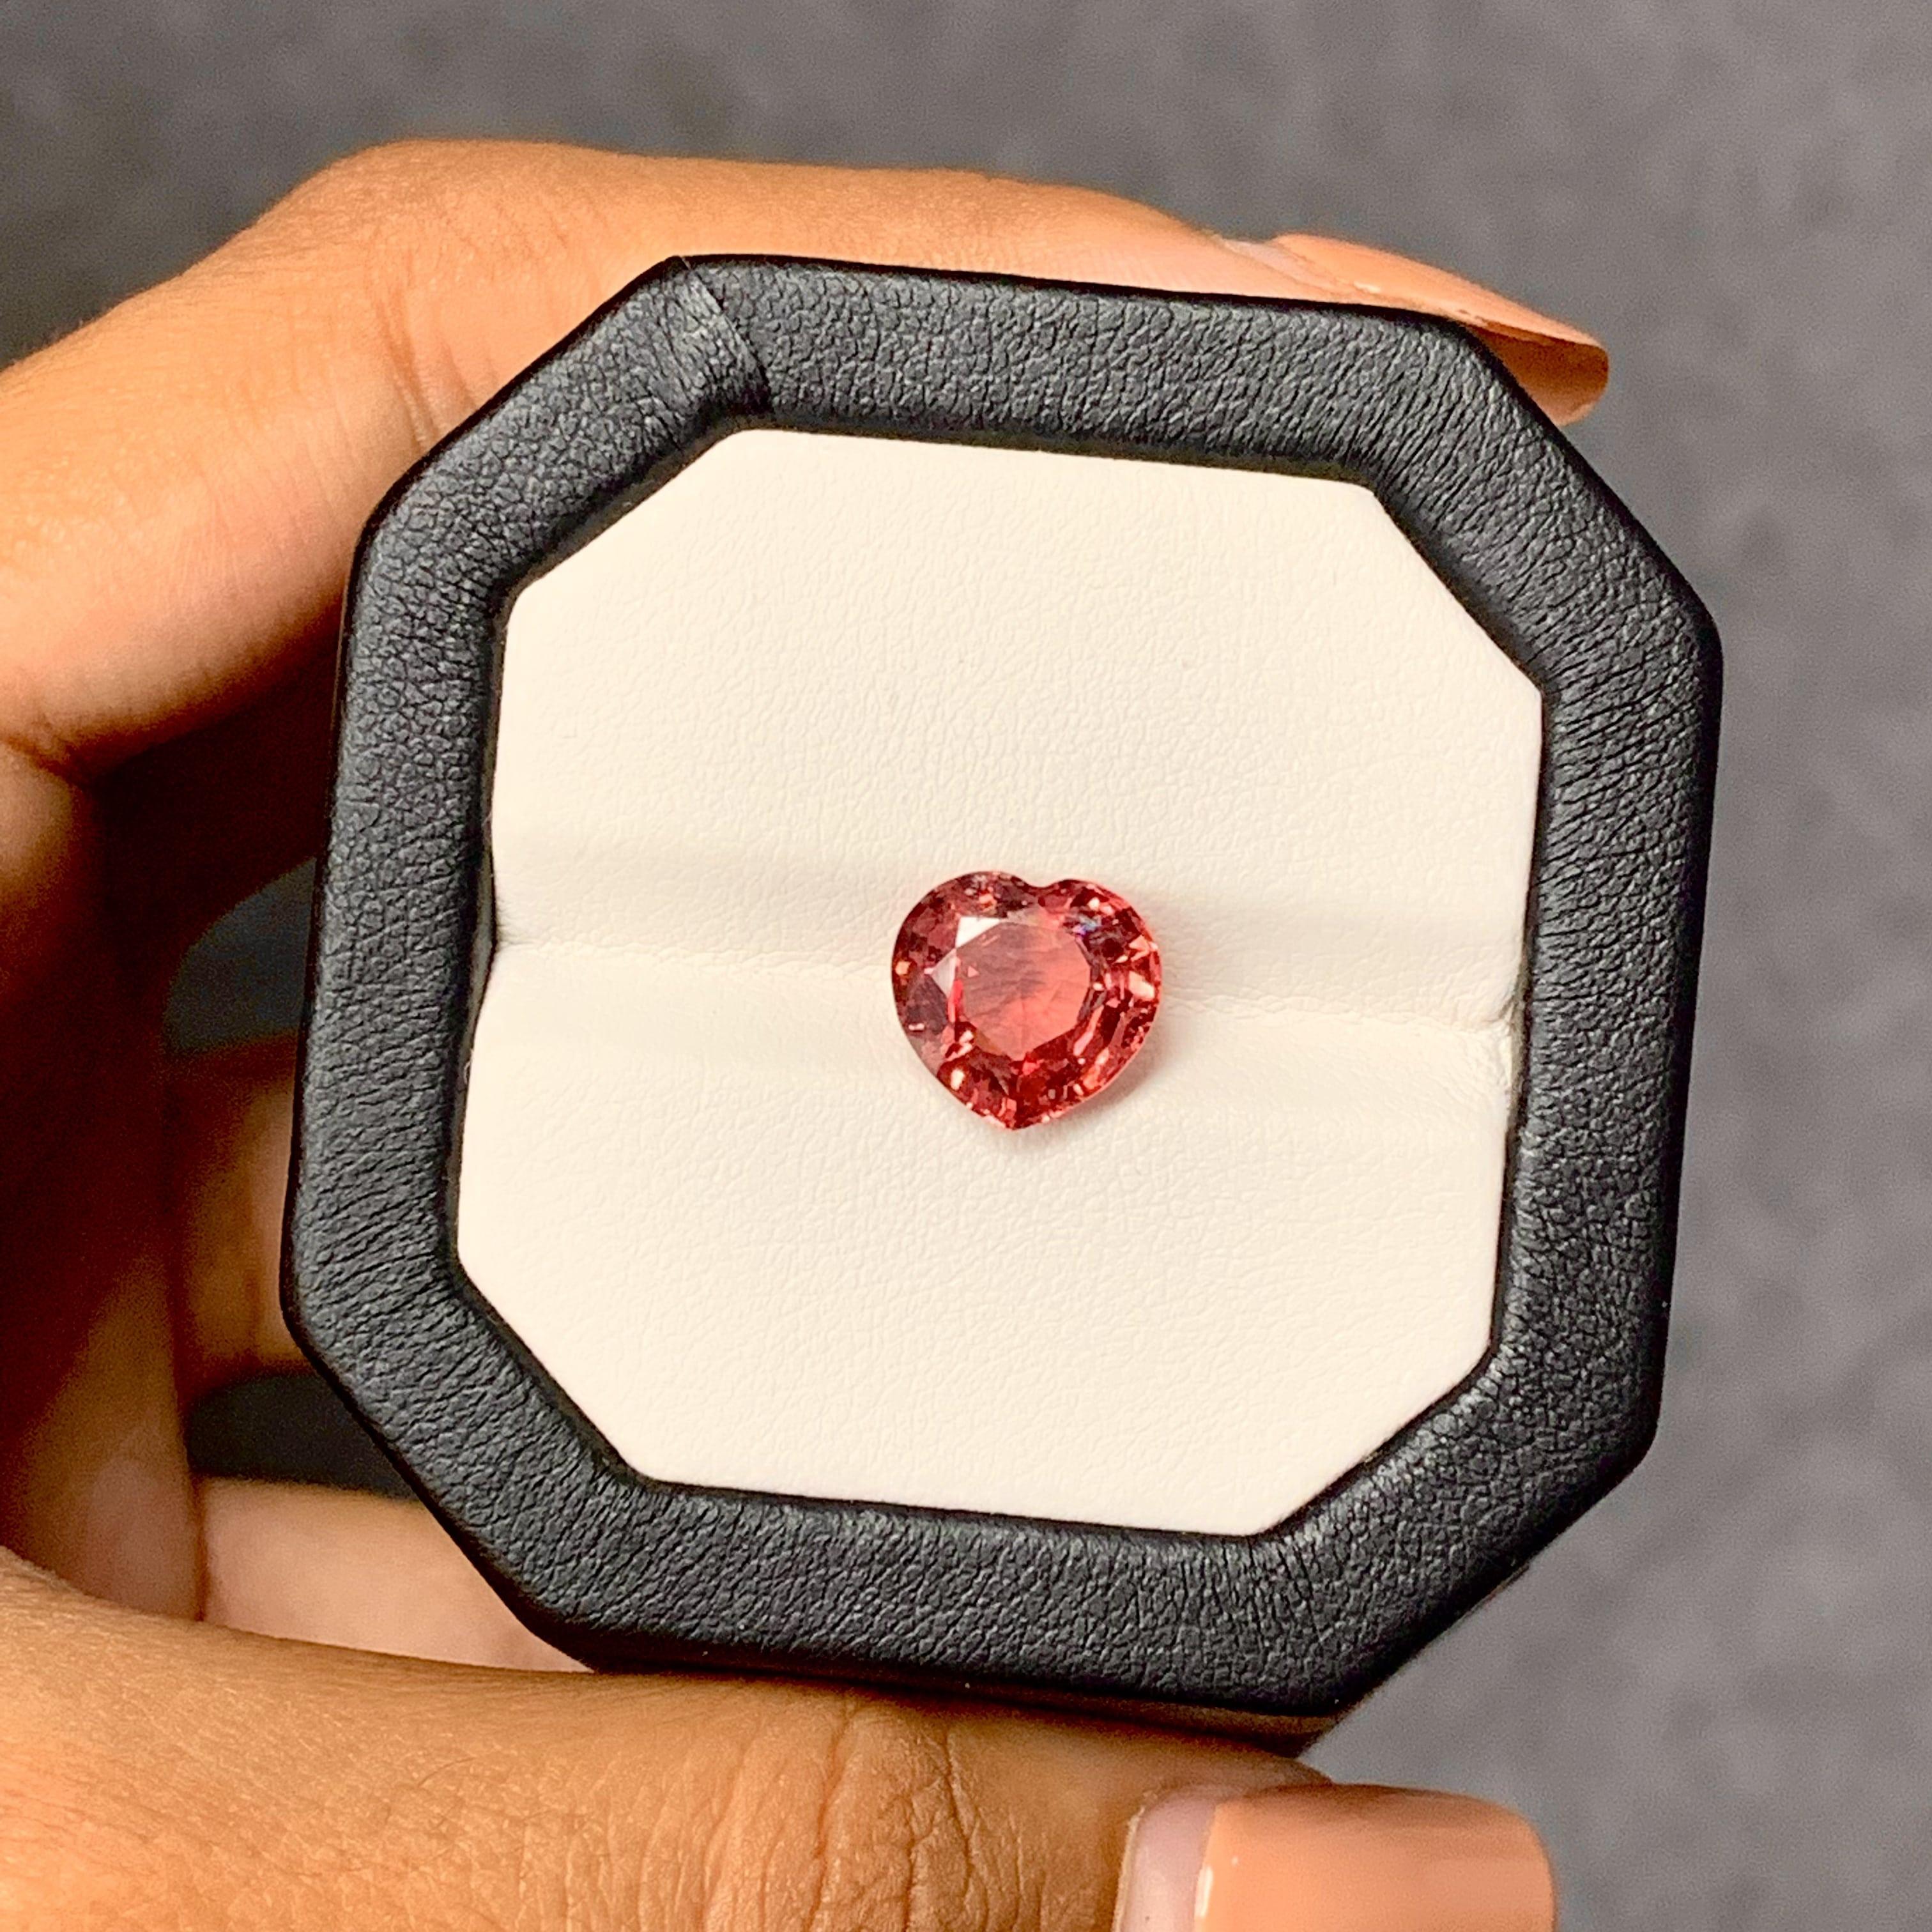 Heart Cut 3.97 Carat Orangish-pink Natural Heart Shaped Spinel For Sale